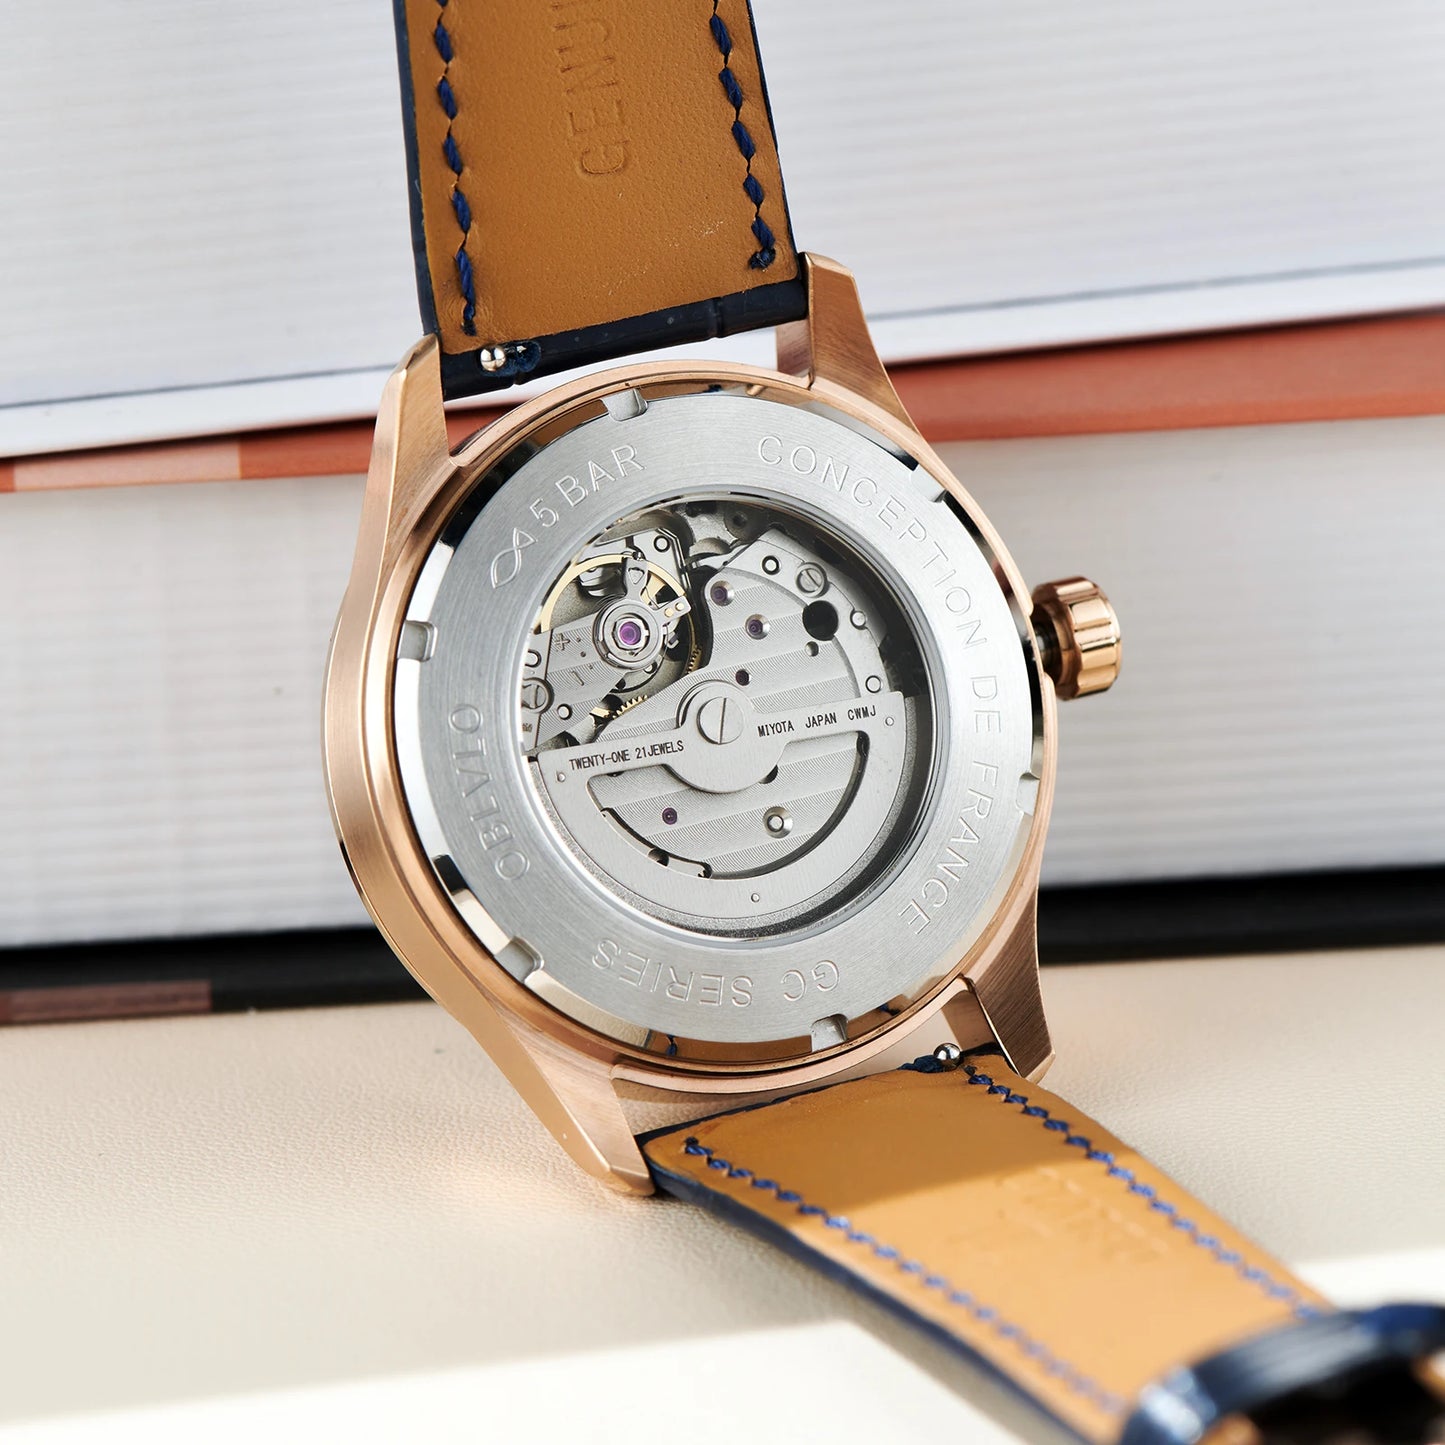 OBLVLO Constellation Stellar, Gold and Silver Watch With Leather Strap